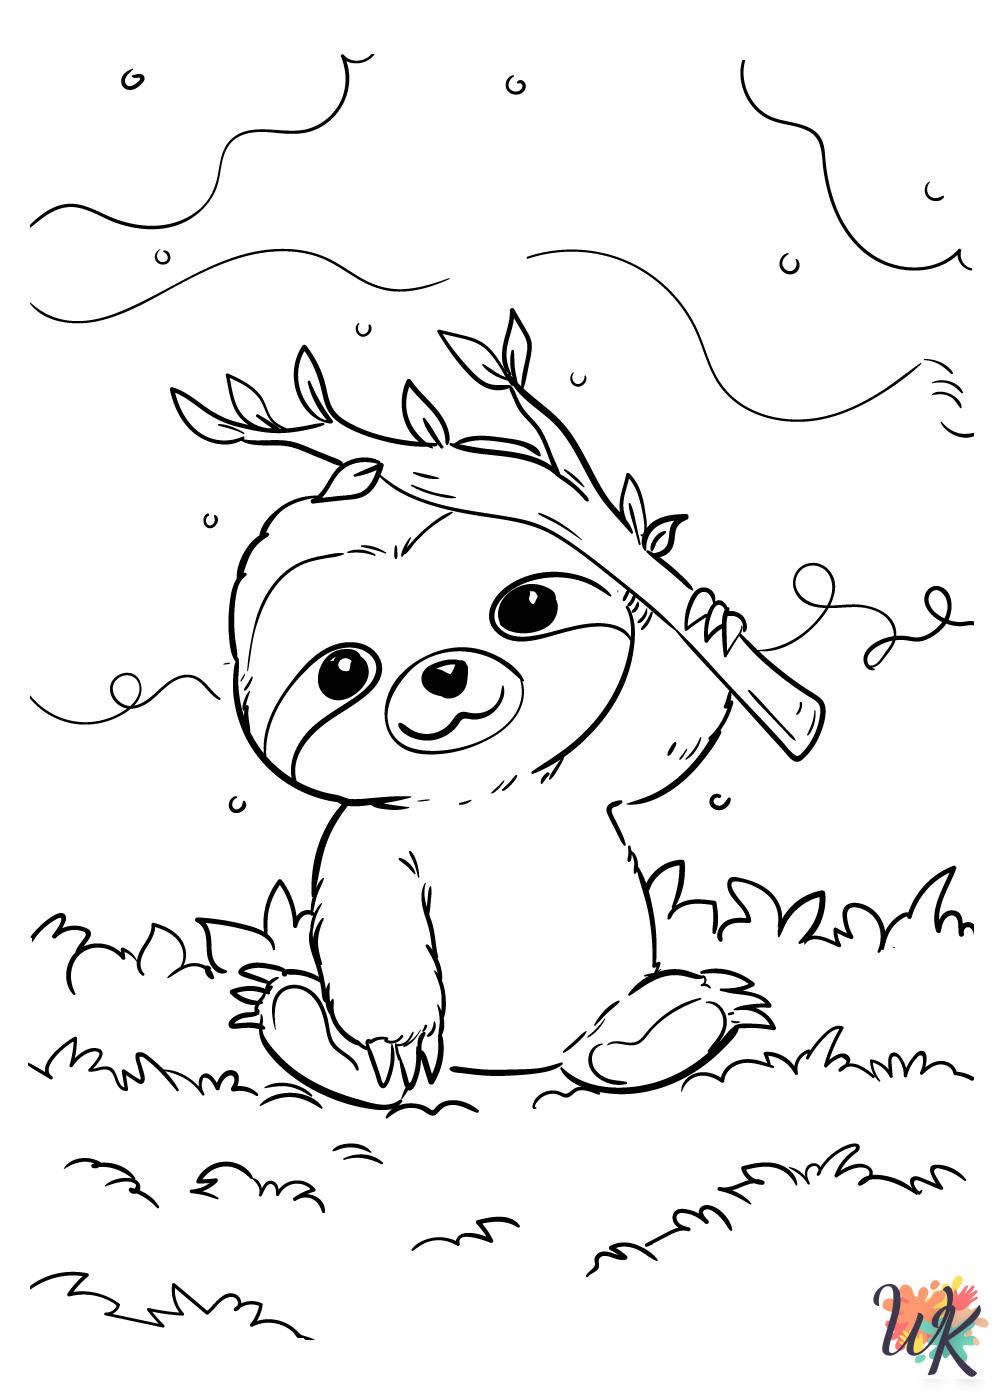 Cute Animals coloring pages free